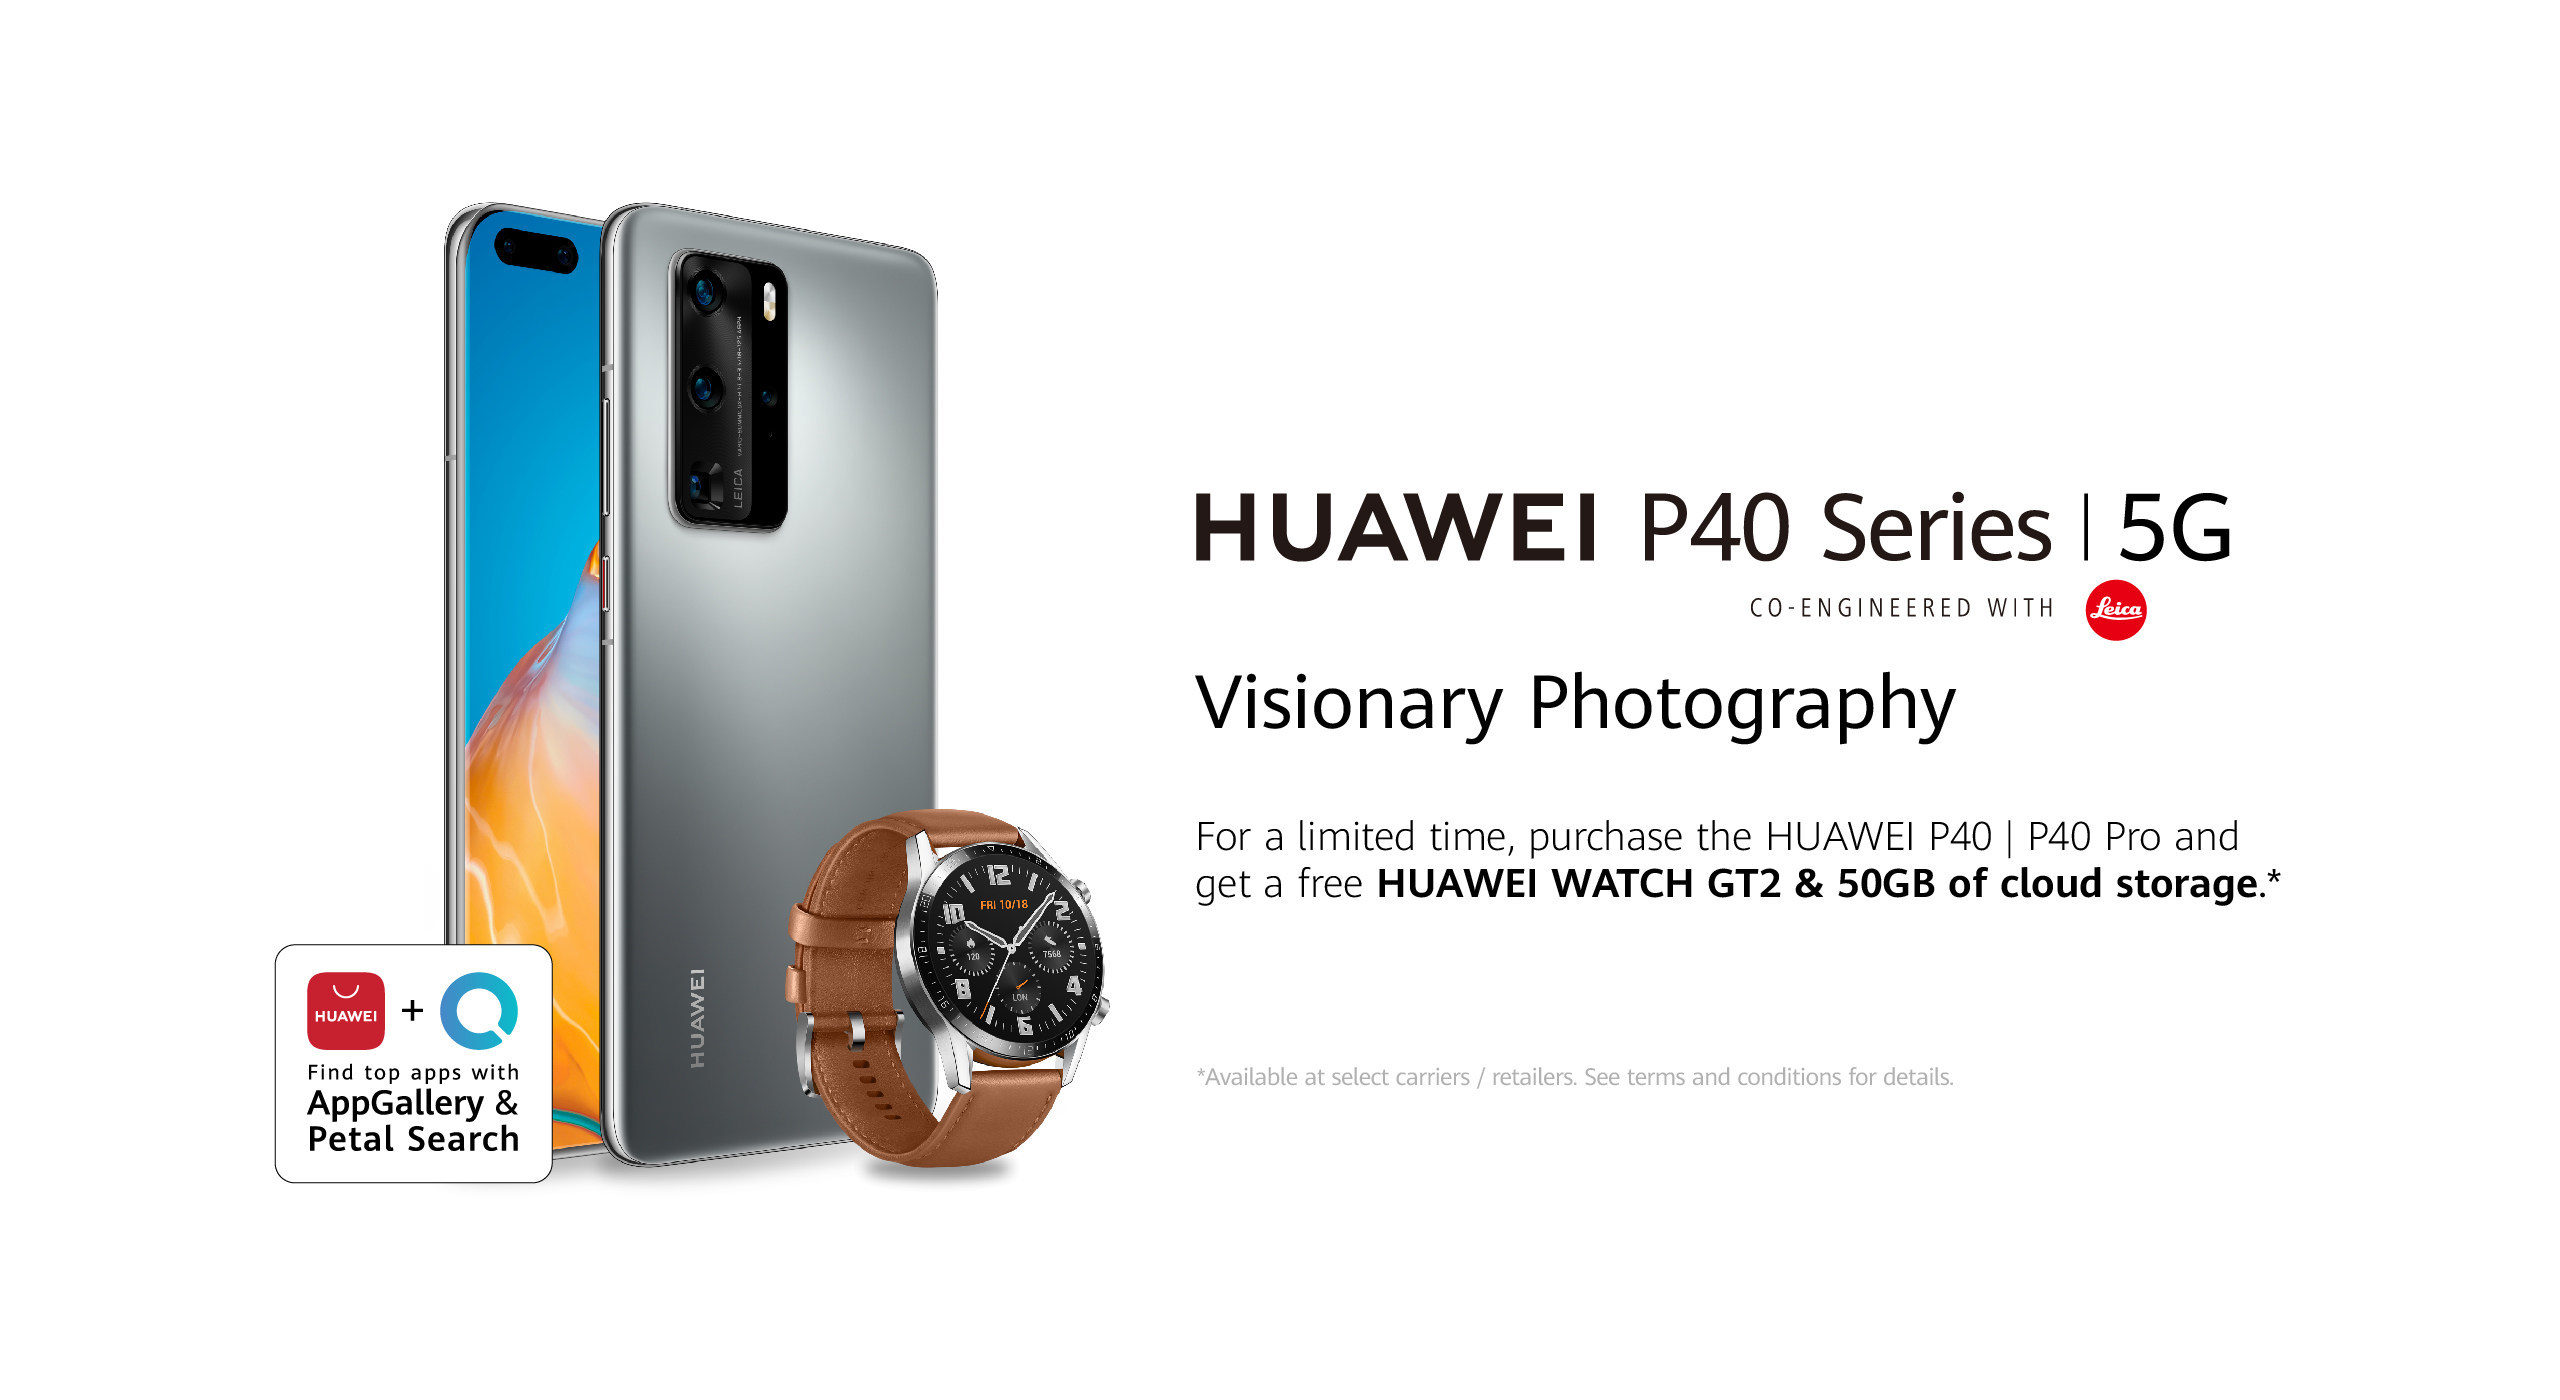 Huawei P40 Series 5g With World S Best Smartphone Camera And The New Huawei Appgallery And Petal Search Now Available In Canada - roblox izle at next new now vblog